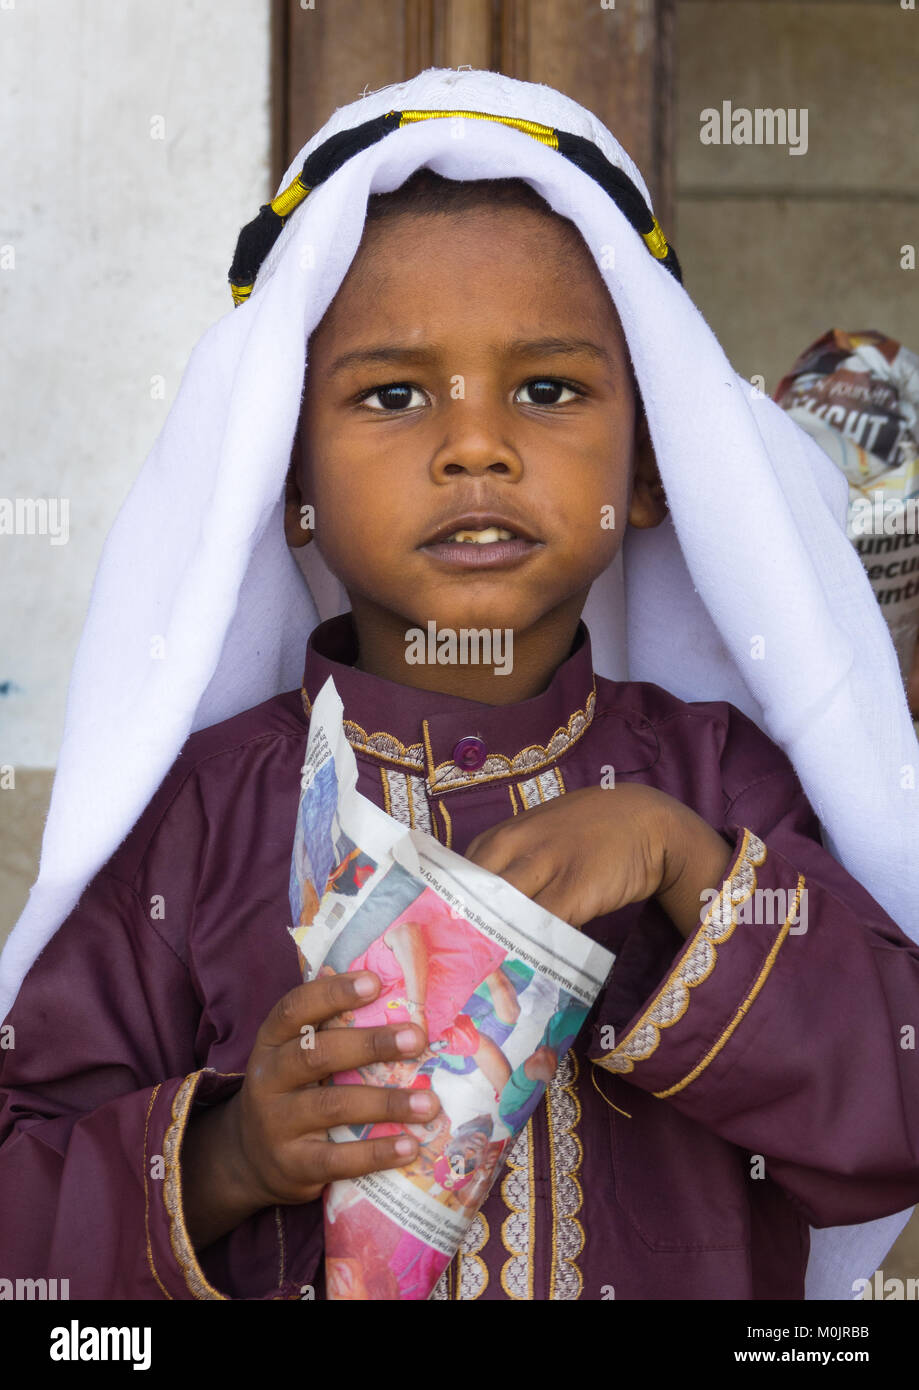 Young boy in traditional suit dressed for the Mawlid festival, eating popcorn, Lamu Island, Kenya Stock Photo